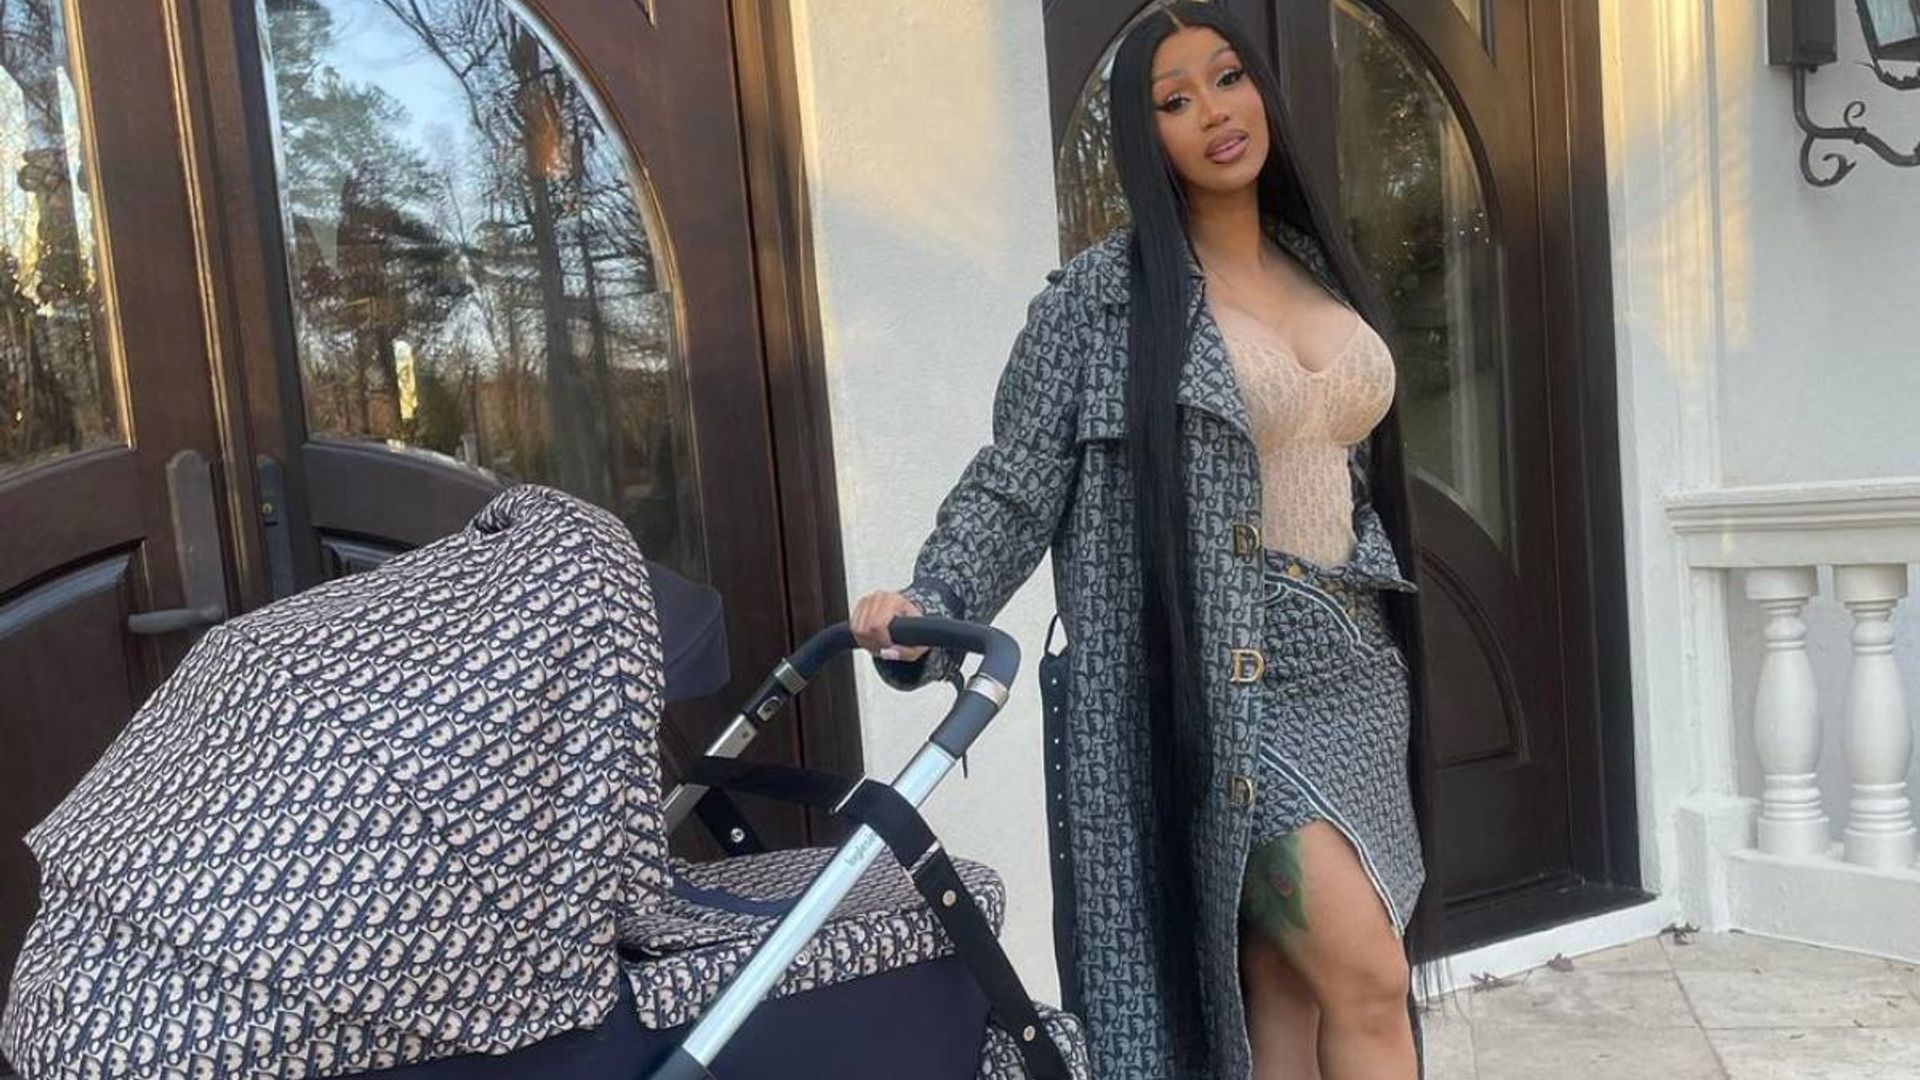 Cardi B makes impressive revelation about baby boy - 'I don't know if this is normal'